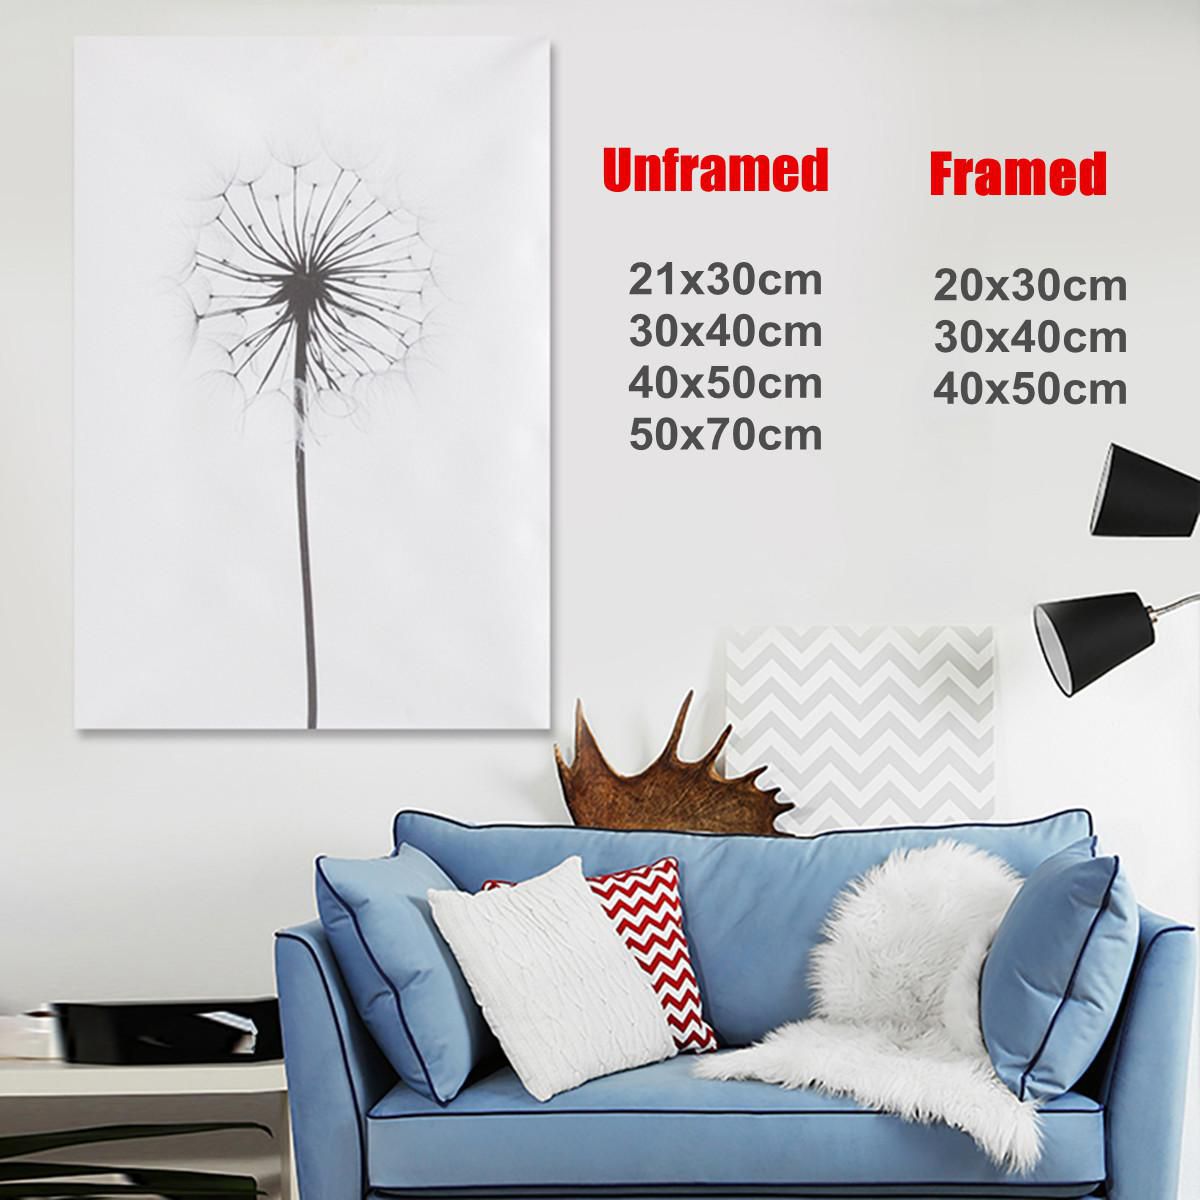 Minimalism Dandelion Canvas Printed Paintings Wall Art Pictures Framed Unframed Buy Minimalism Dandelion Canvas Printed Paintings Wall Art Pictures Framed Unframed At Best Price In India On Snapdeal